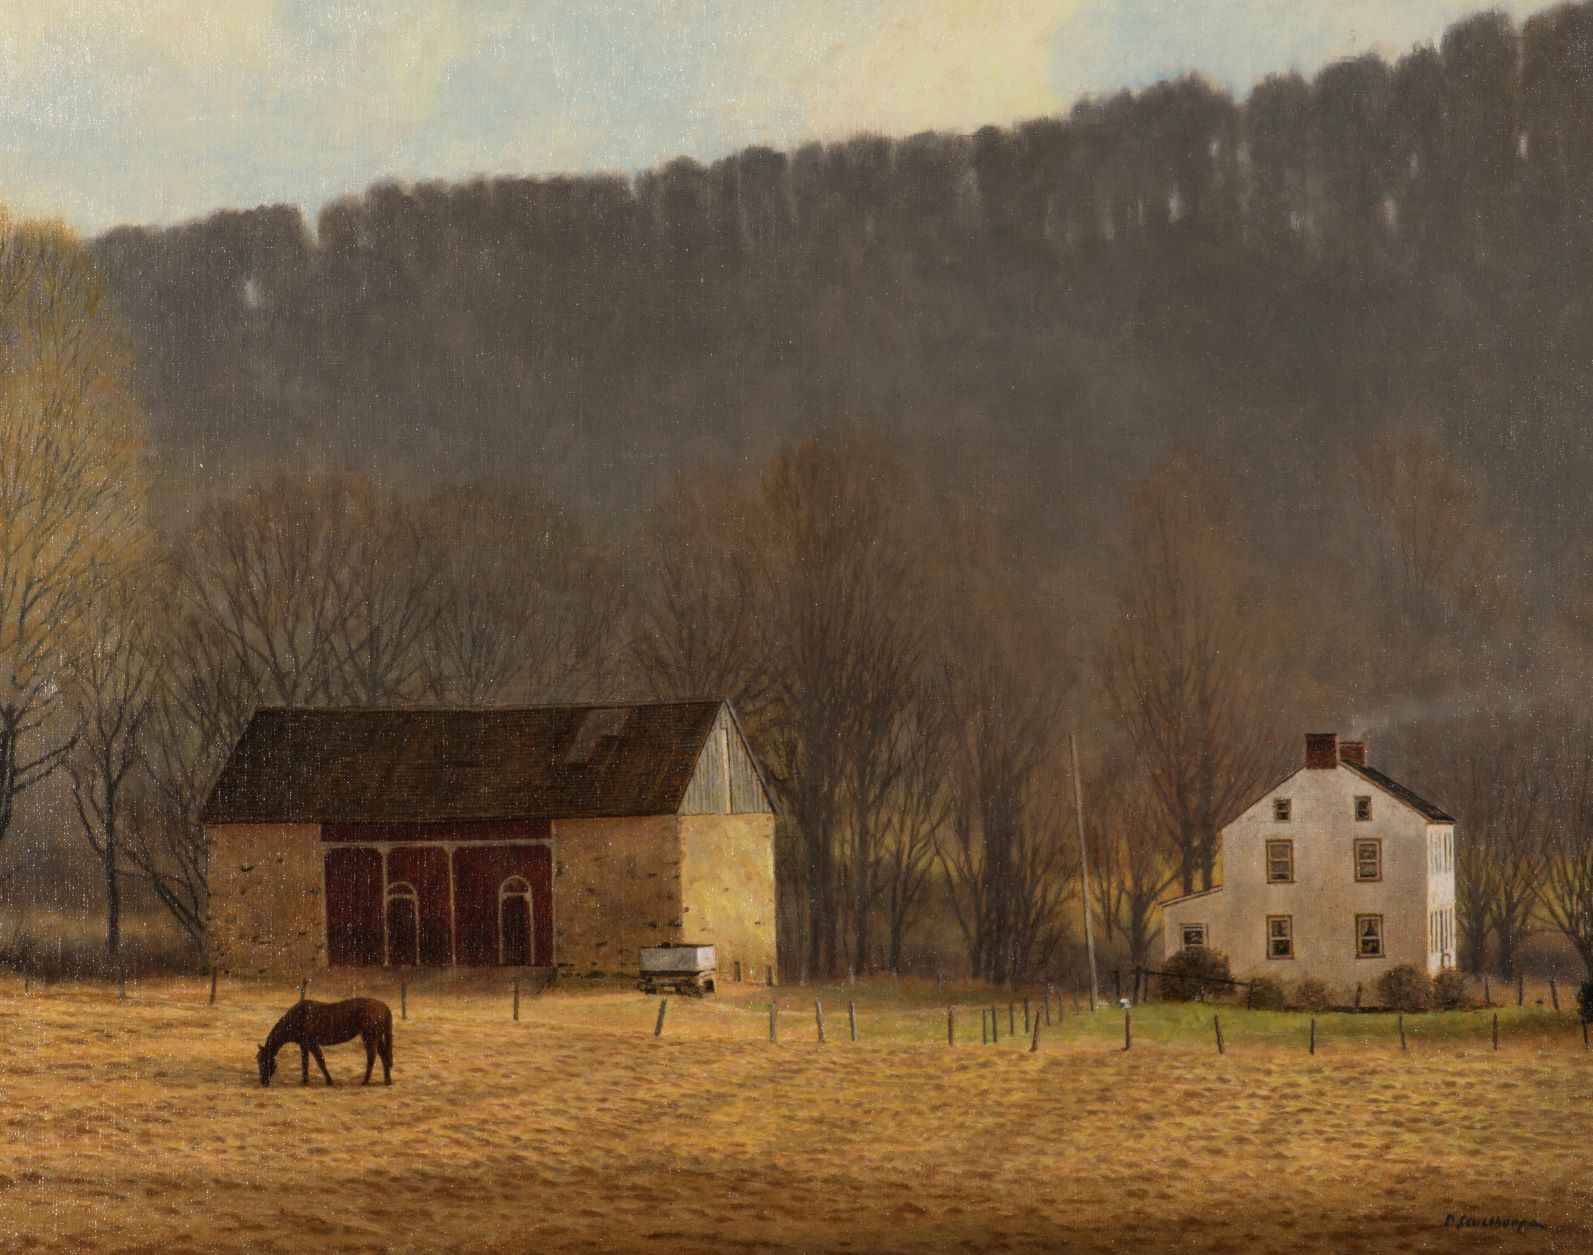 Rappahannock Country ... by  Peter Sculthorpe - Masterpiece Online